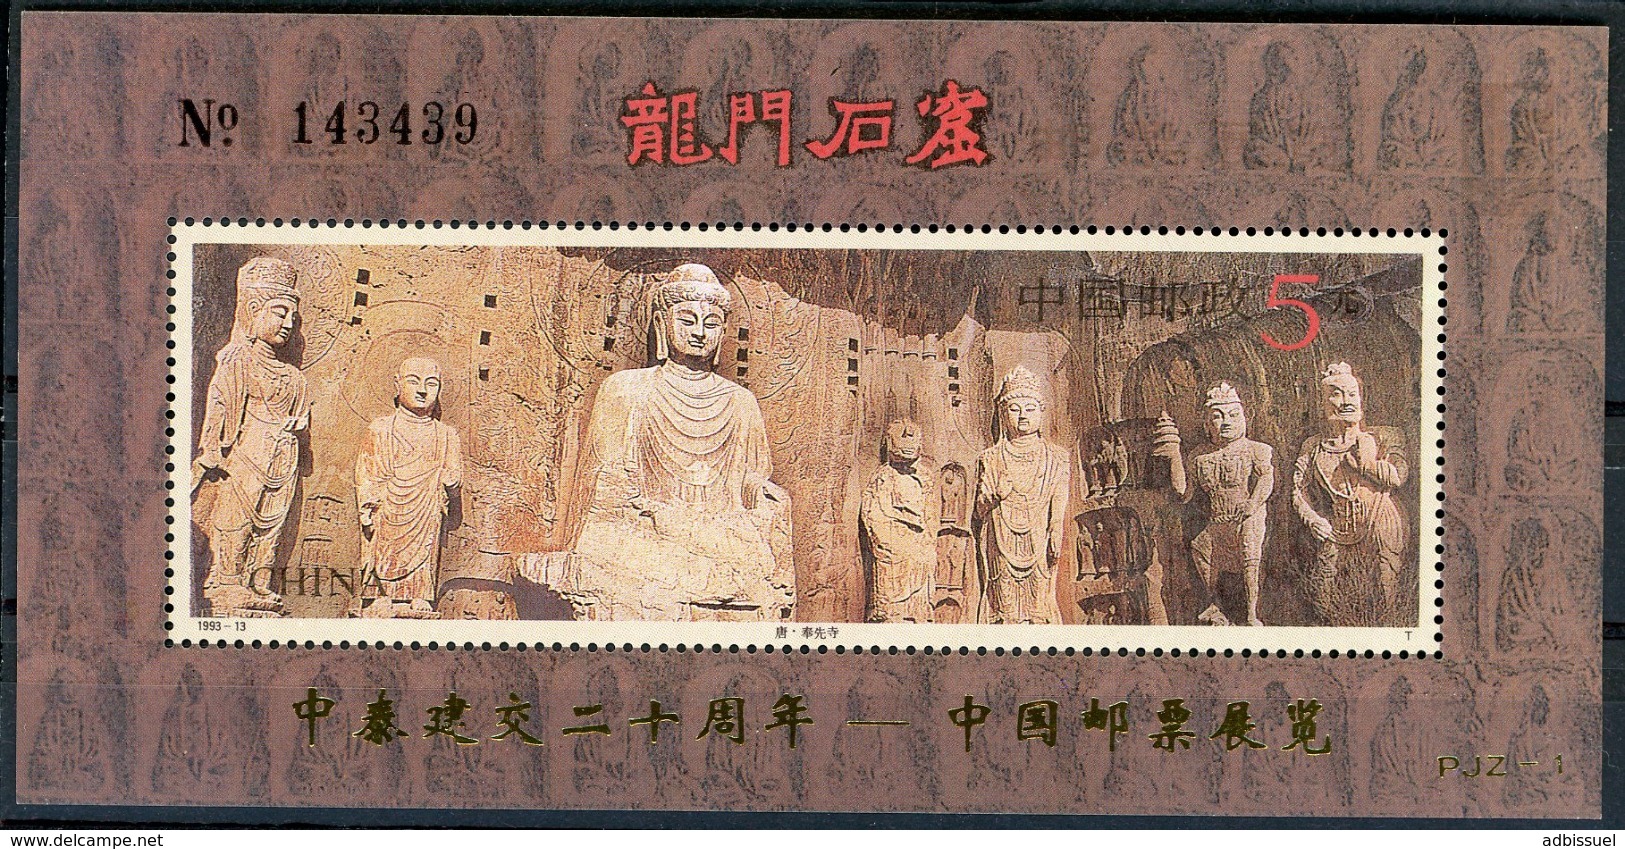 1995 CHINA / BF N° 77 (Yvert & Tellier) / ** MNH. Cat. Value = 10 € - Blocs-feuillets